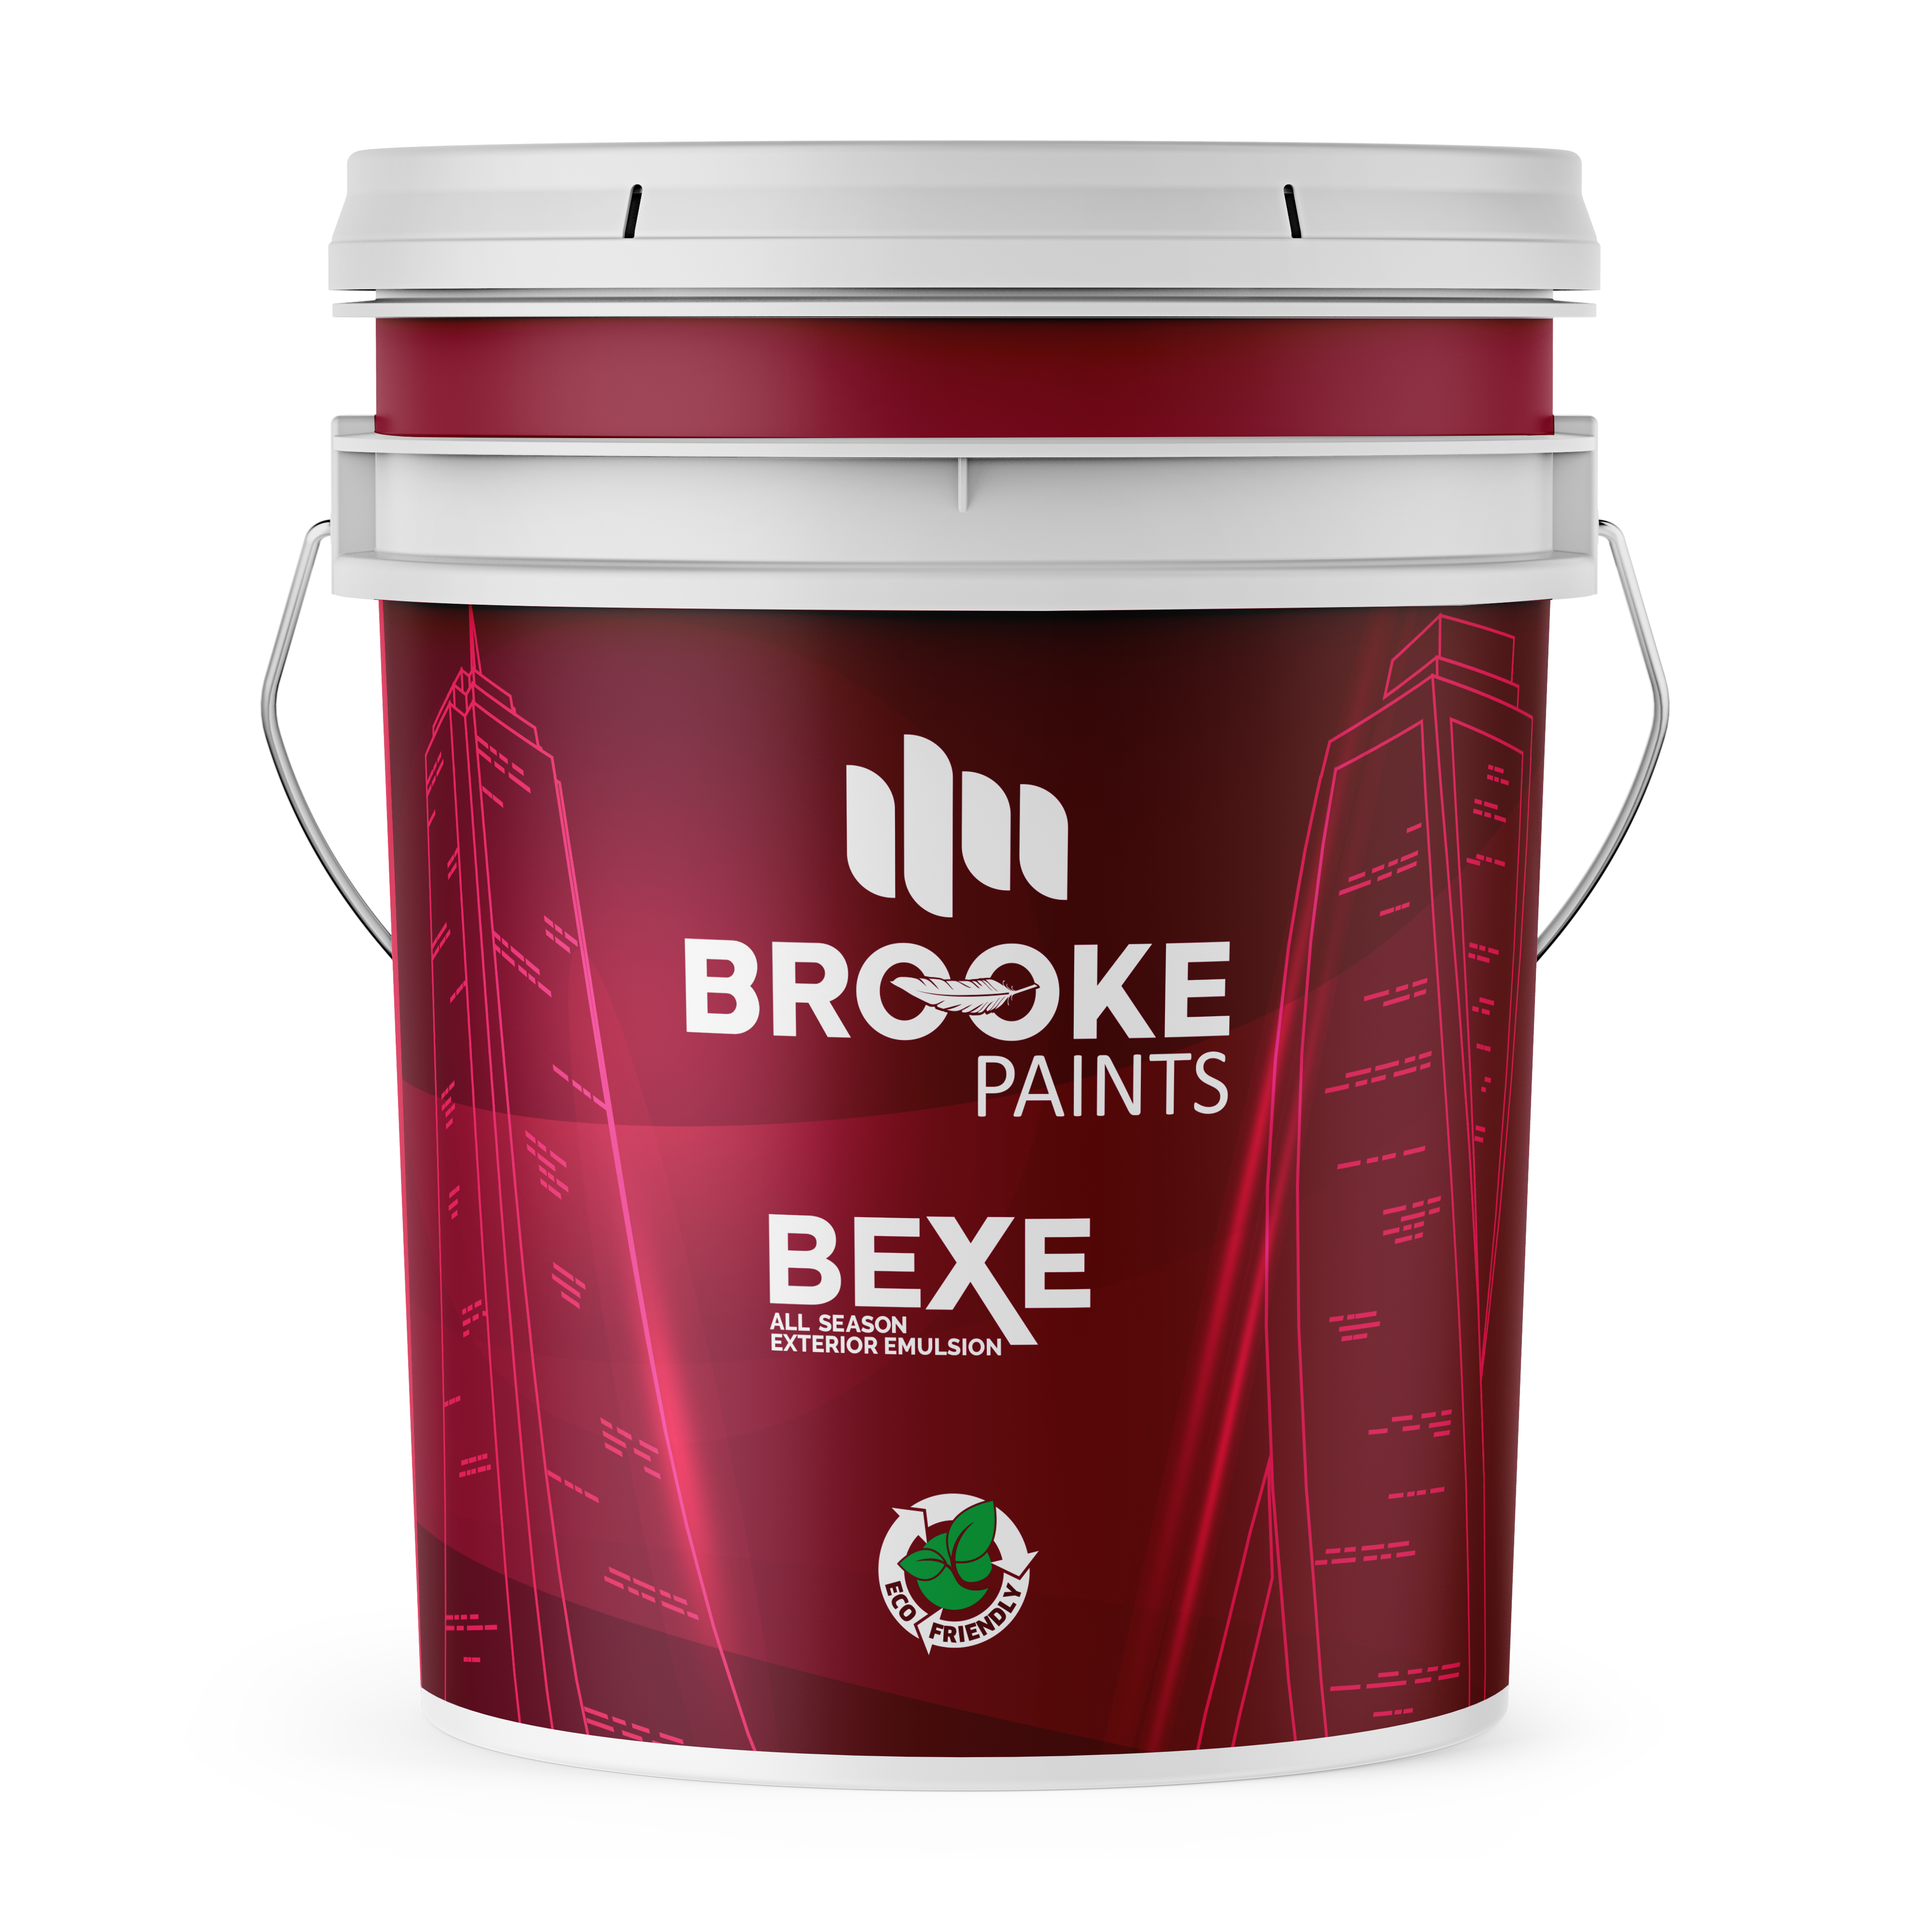 Best exterior emulsion for your home